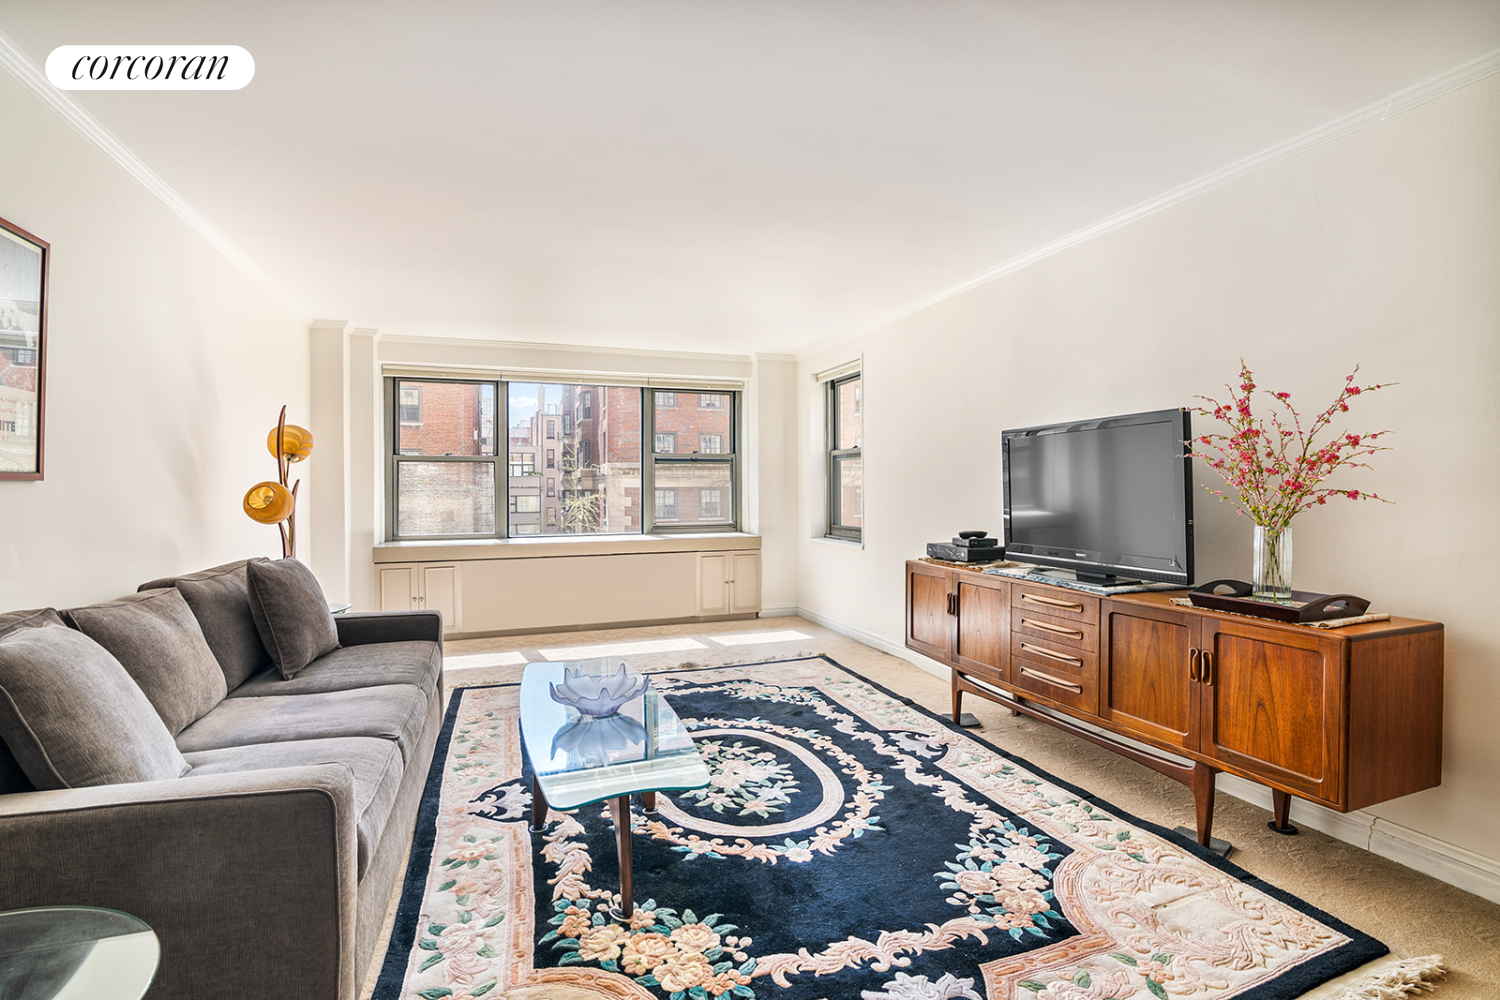 525 East 86th Street 5F, Yorkville, Upper East Side, NYC - 2 Bedrooms  
2 Bathrooms  
5 Rooms - 